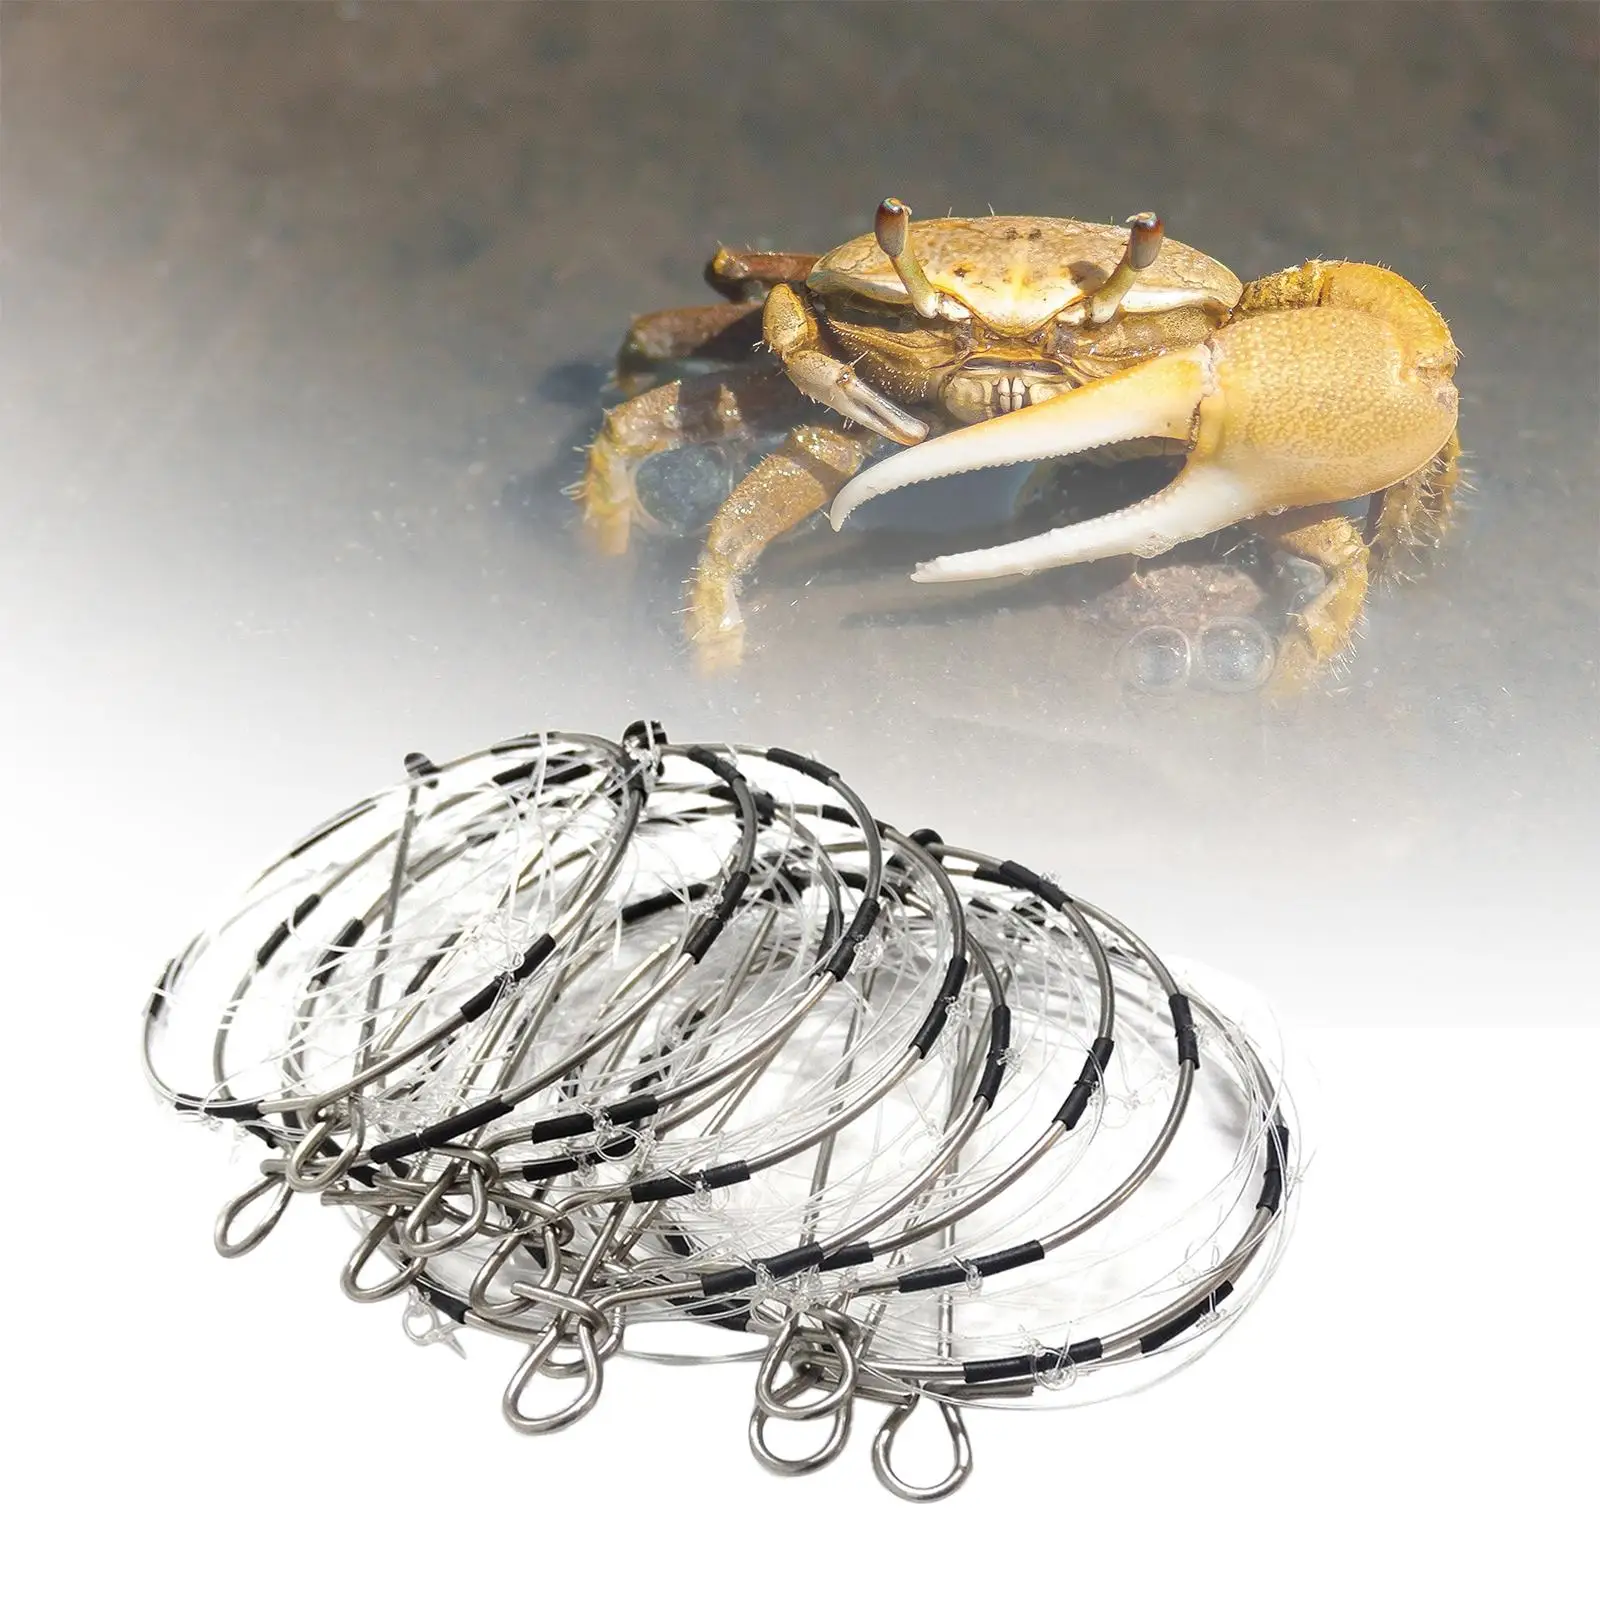 10x Crab Cast Trap Repeated Use Catch Crabs Tool for Crab Prawn Lobster